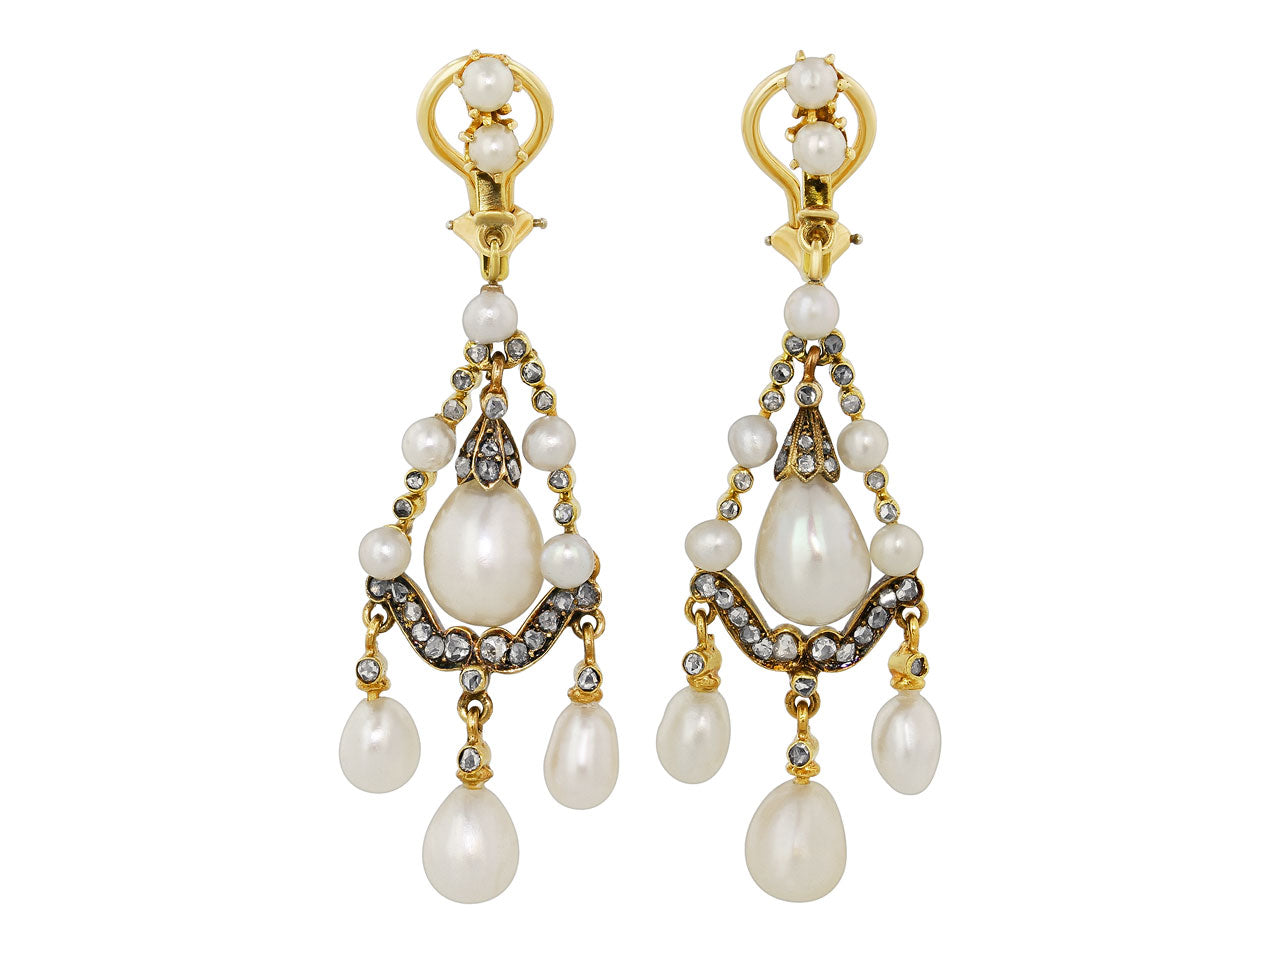 Antique Victorian Natural Pearl, Cultured Pearl and Diamond Earrings in Silver and Gold